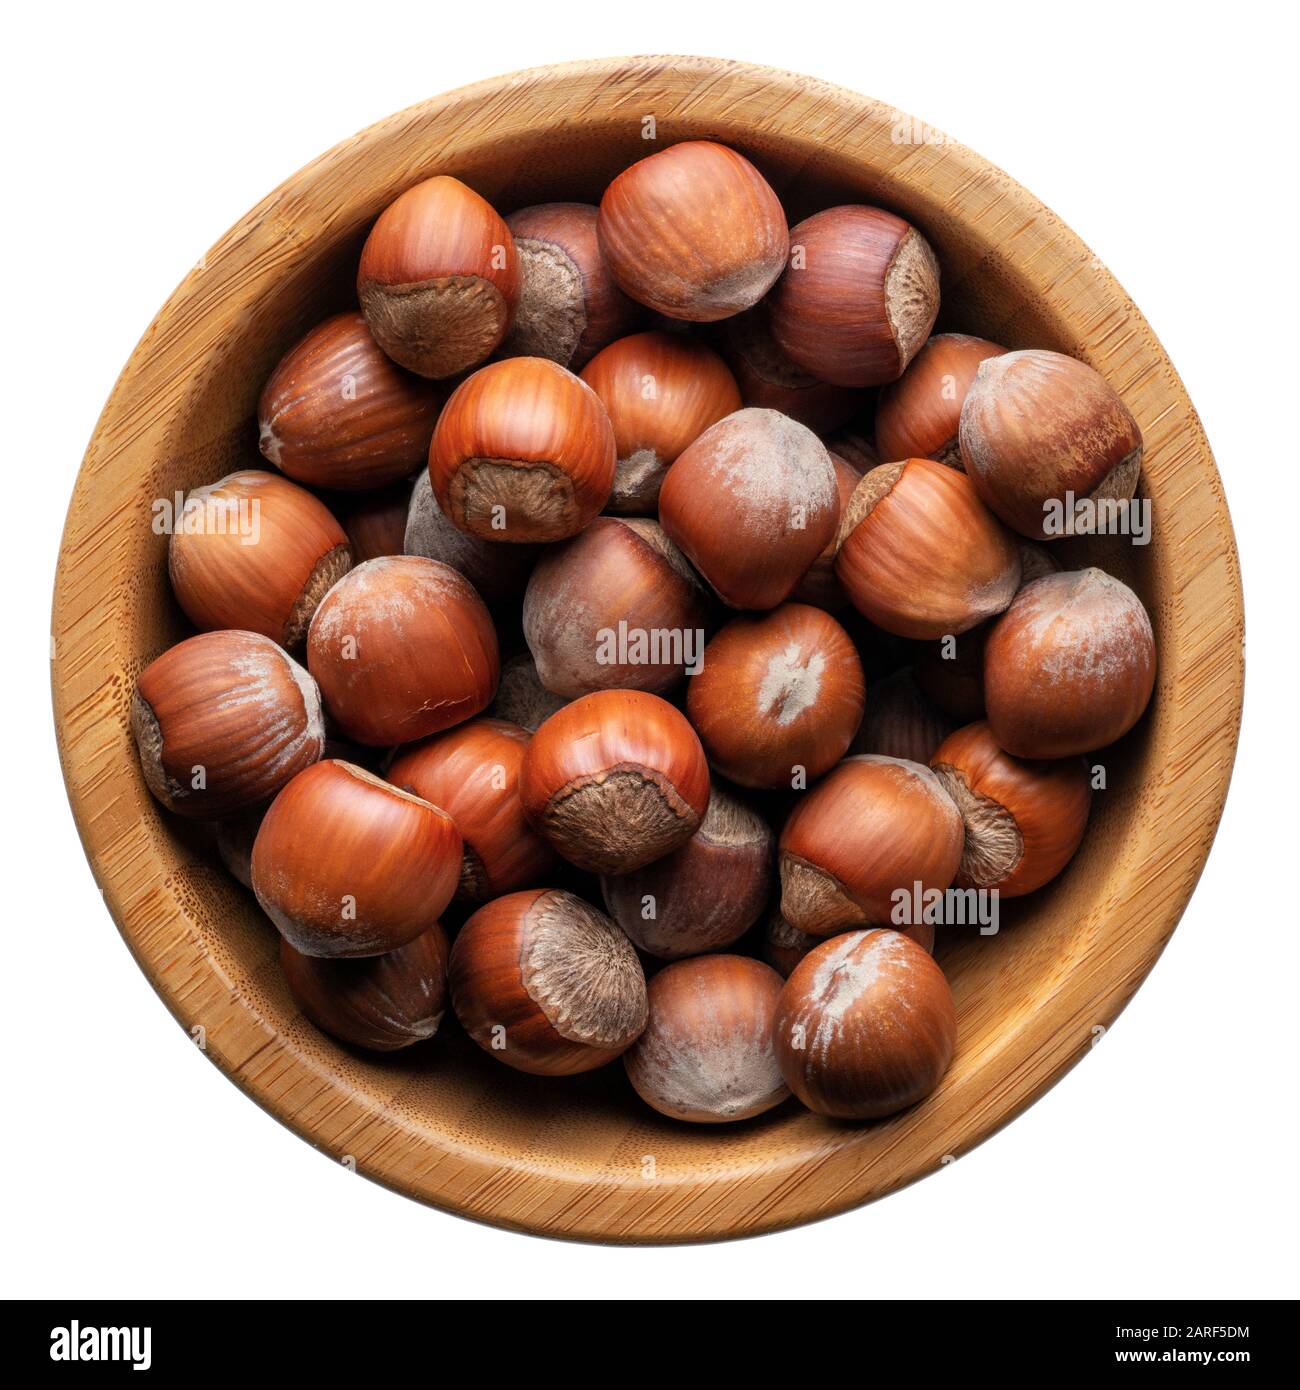 Food and drinks: group of unpeeled hazelnuts in a round wooden bowl, isolated on white background Stock Photo